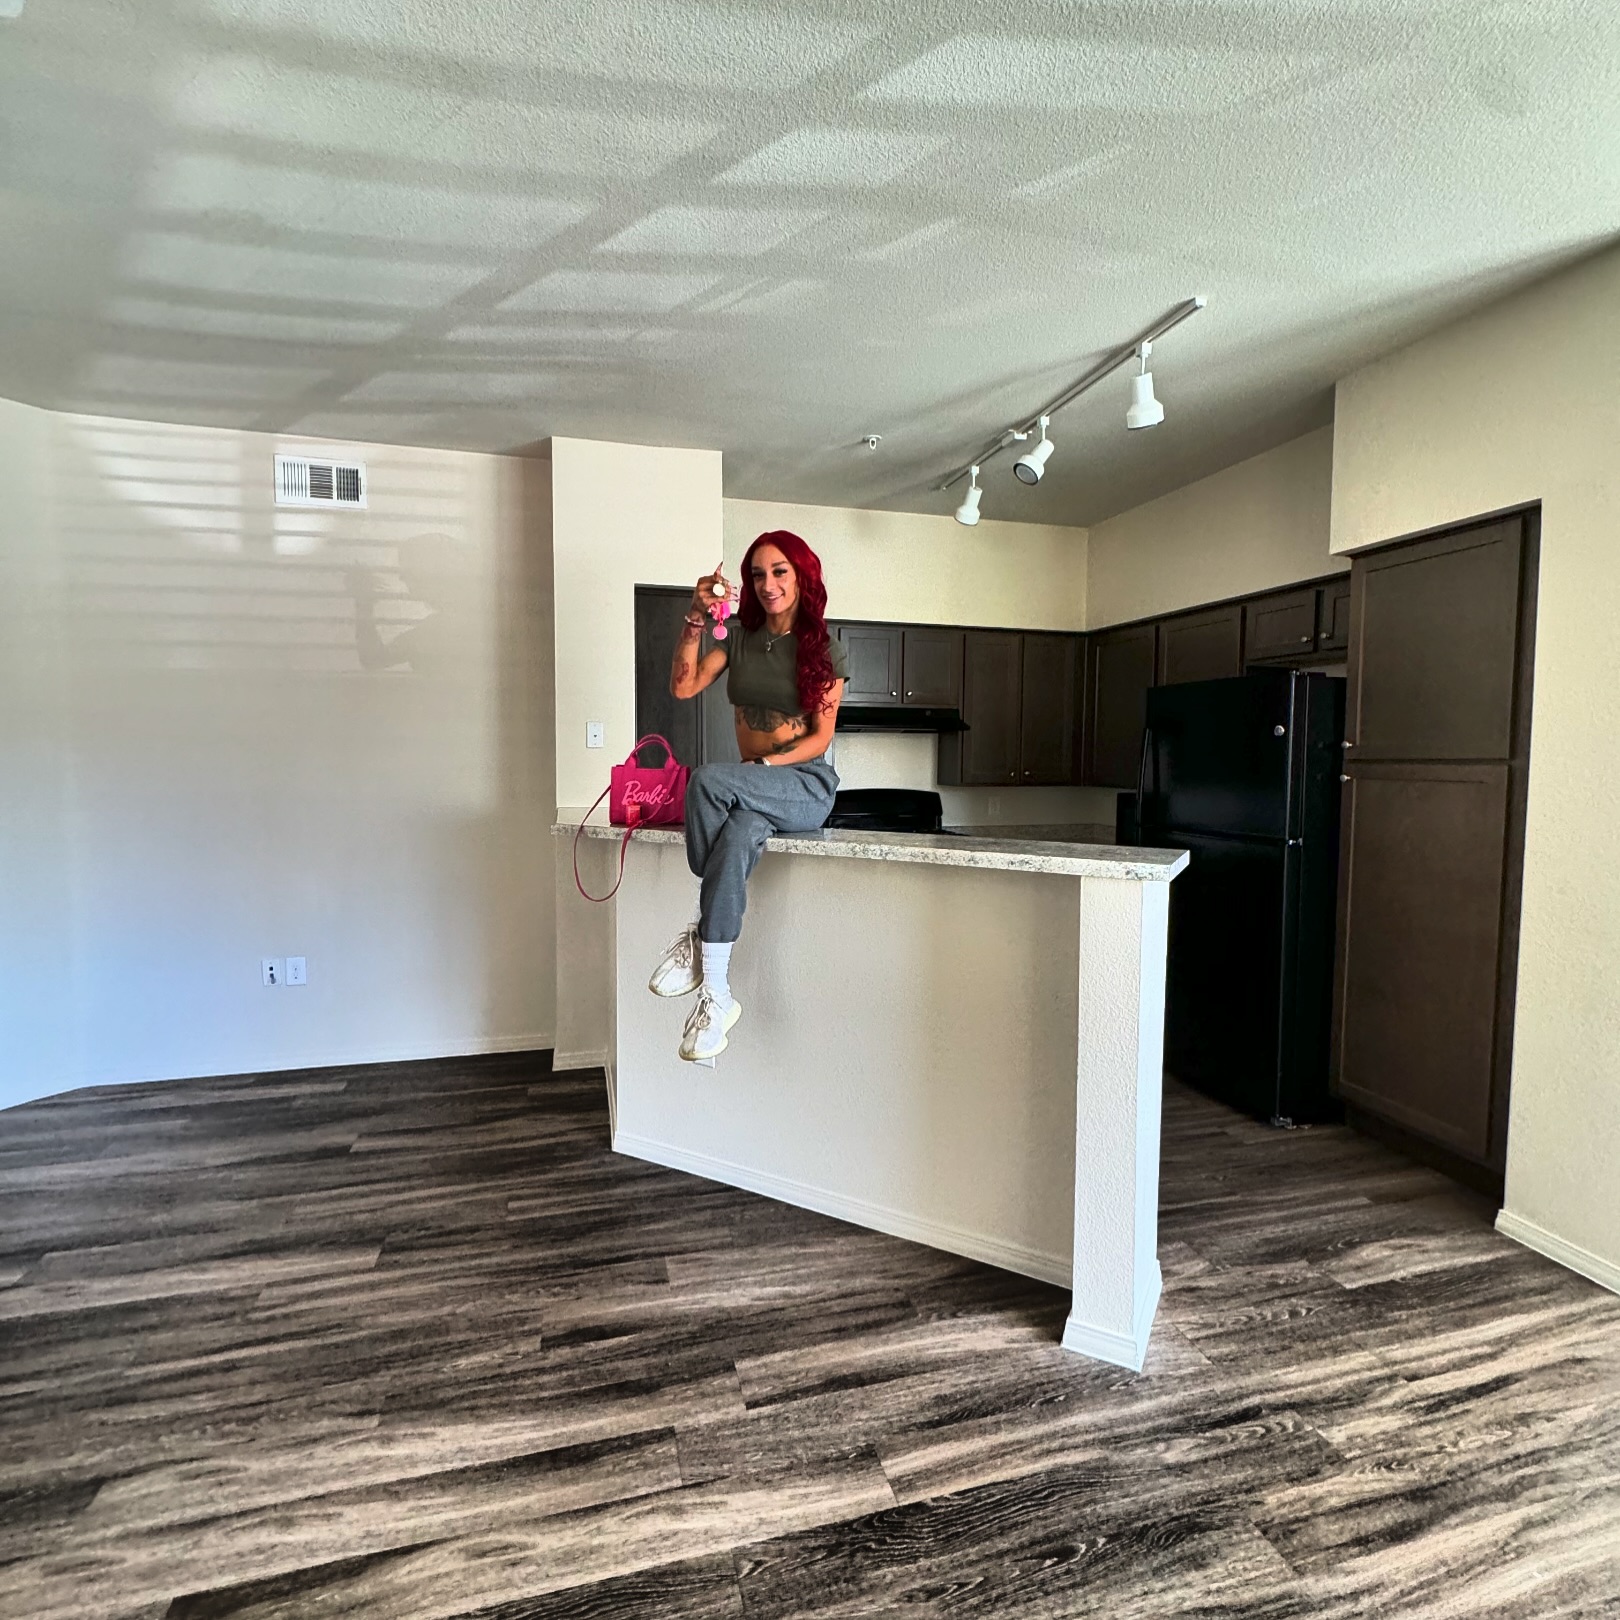 To new beginnings 🔑✨ ! 

I viewed these apartments 🏡 2 years ago right before I moved in with my friend for the last 2 years and I promised I would get it when the time was right 🙏🏽. Since I turned 18 I have lived with literally everyone from friends, to bestfriends, family, co-workers, boyfriends, the list continues 📦 just to not be alone but you must grow 🦋. I’m so excited to start over and paint this place RED 📍.

#NewBeginnings #NewChapter #LasVegas #TS #Transgender #NewApartment #SofiasTransformation2024 🏳️‍⚧️